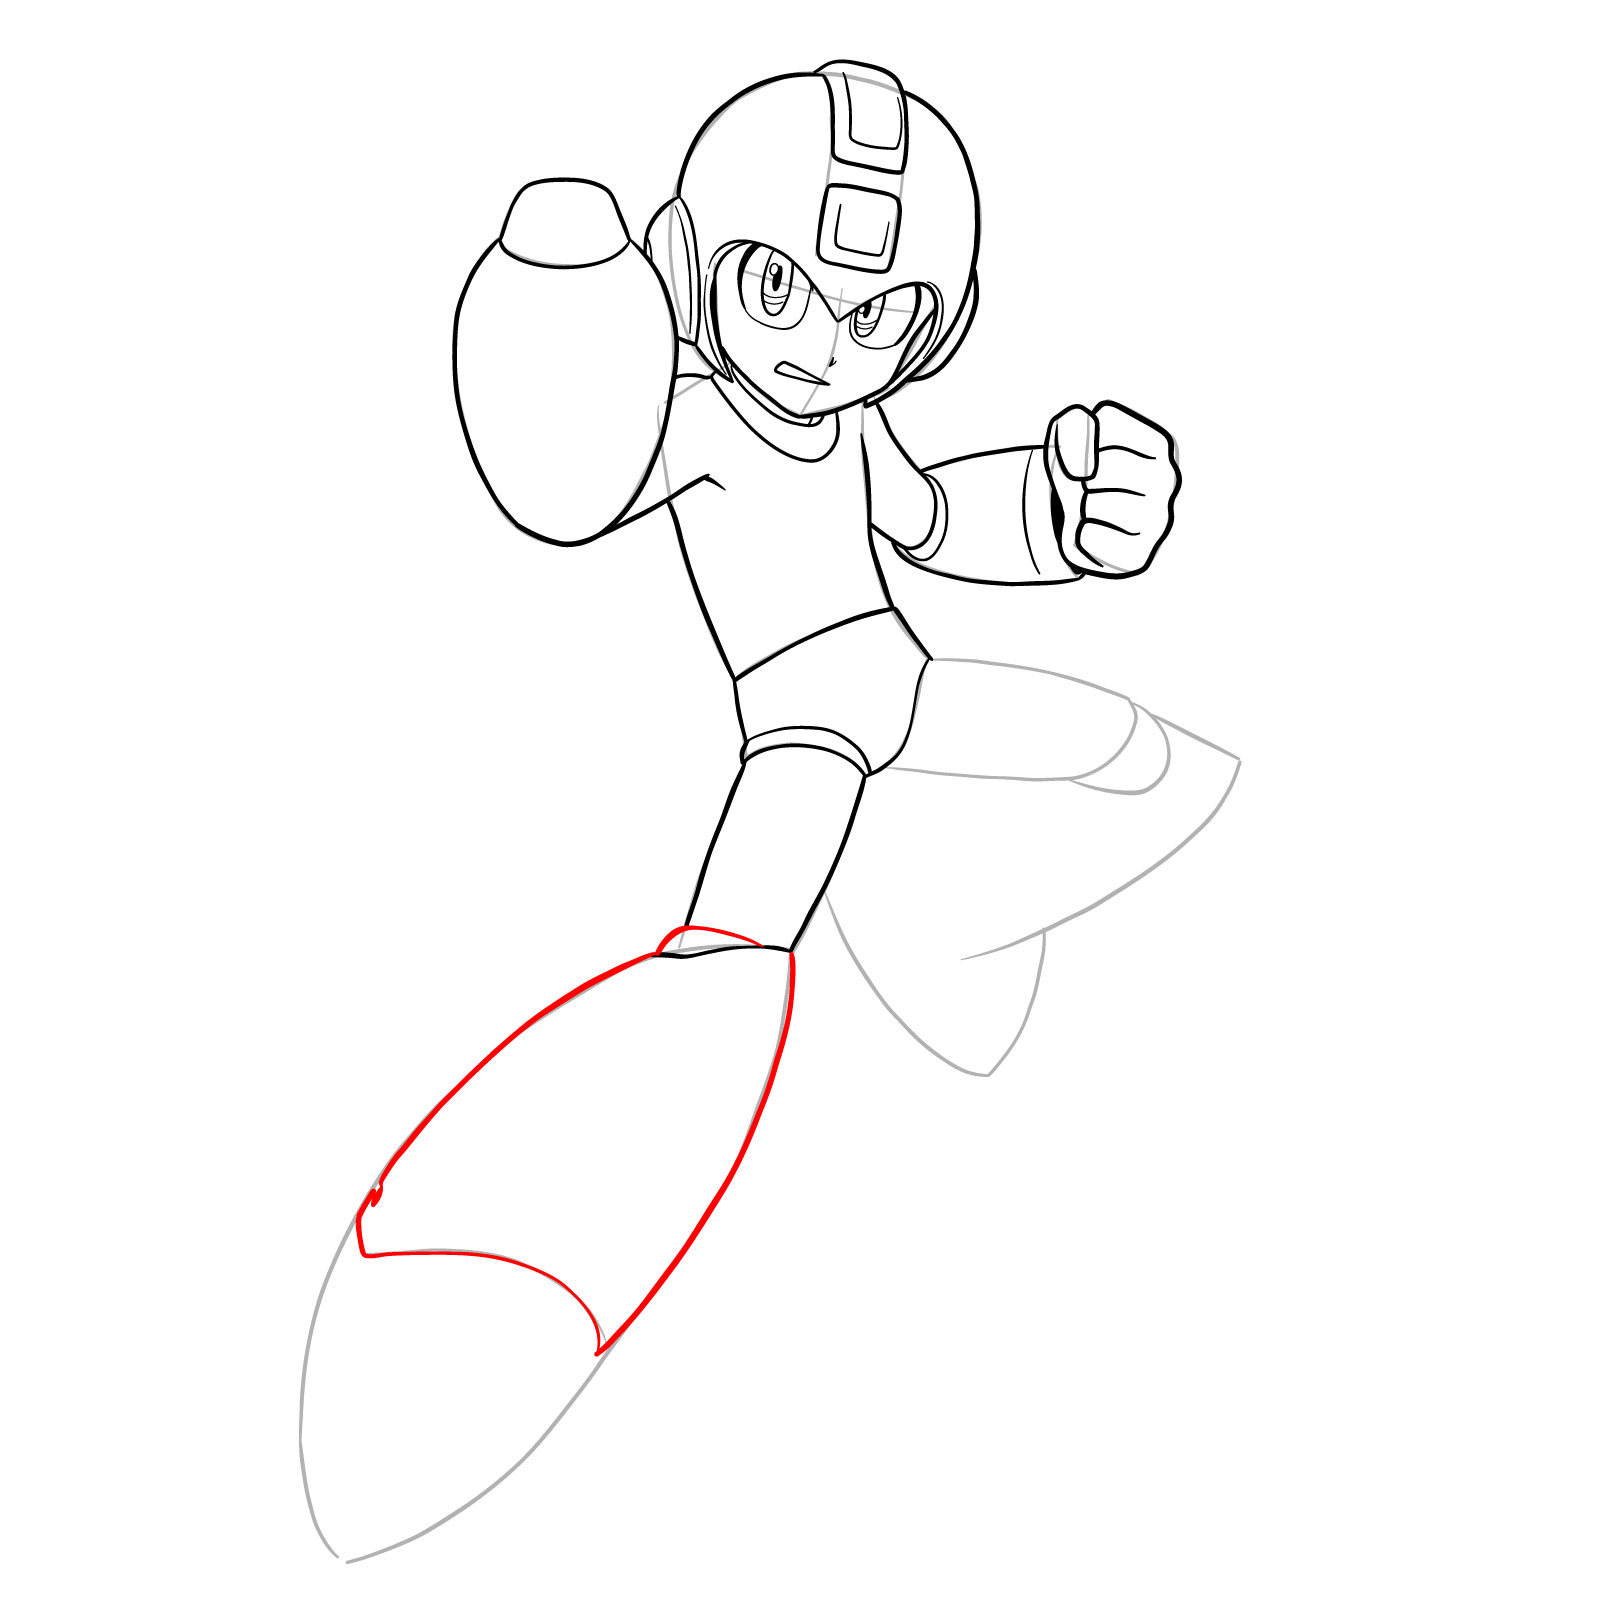 How to draw Mega Man from the 11th game - step 23